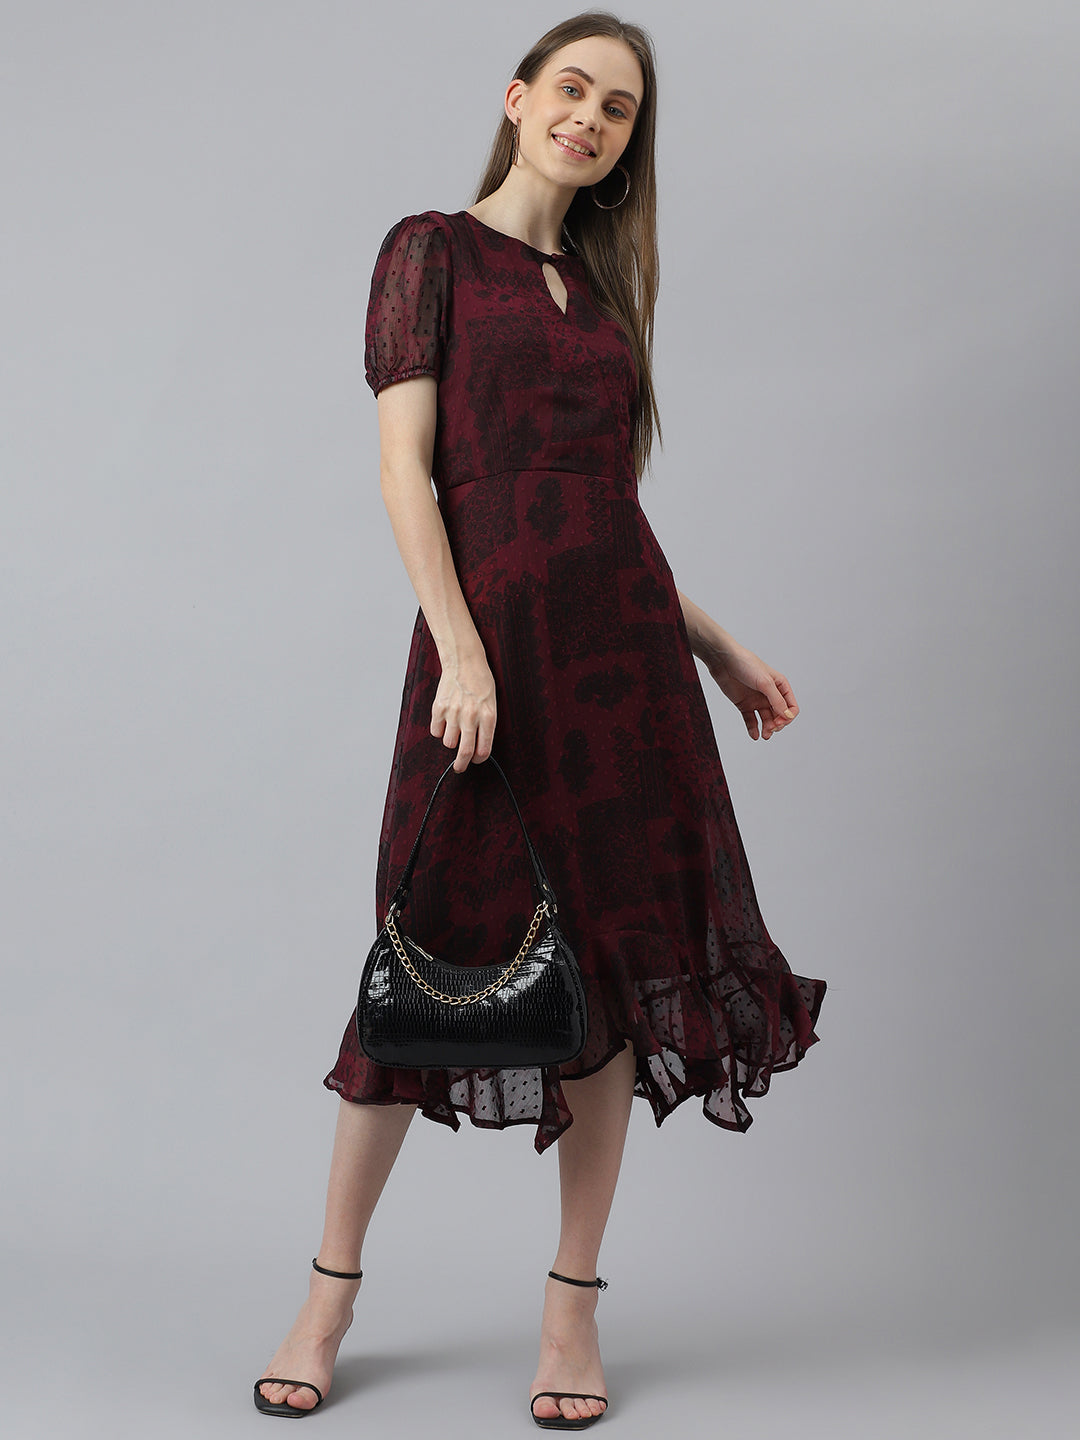 Maroon Half Sleeve Round Neck Long A-Line Women Dress for Party